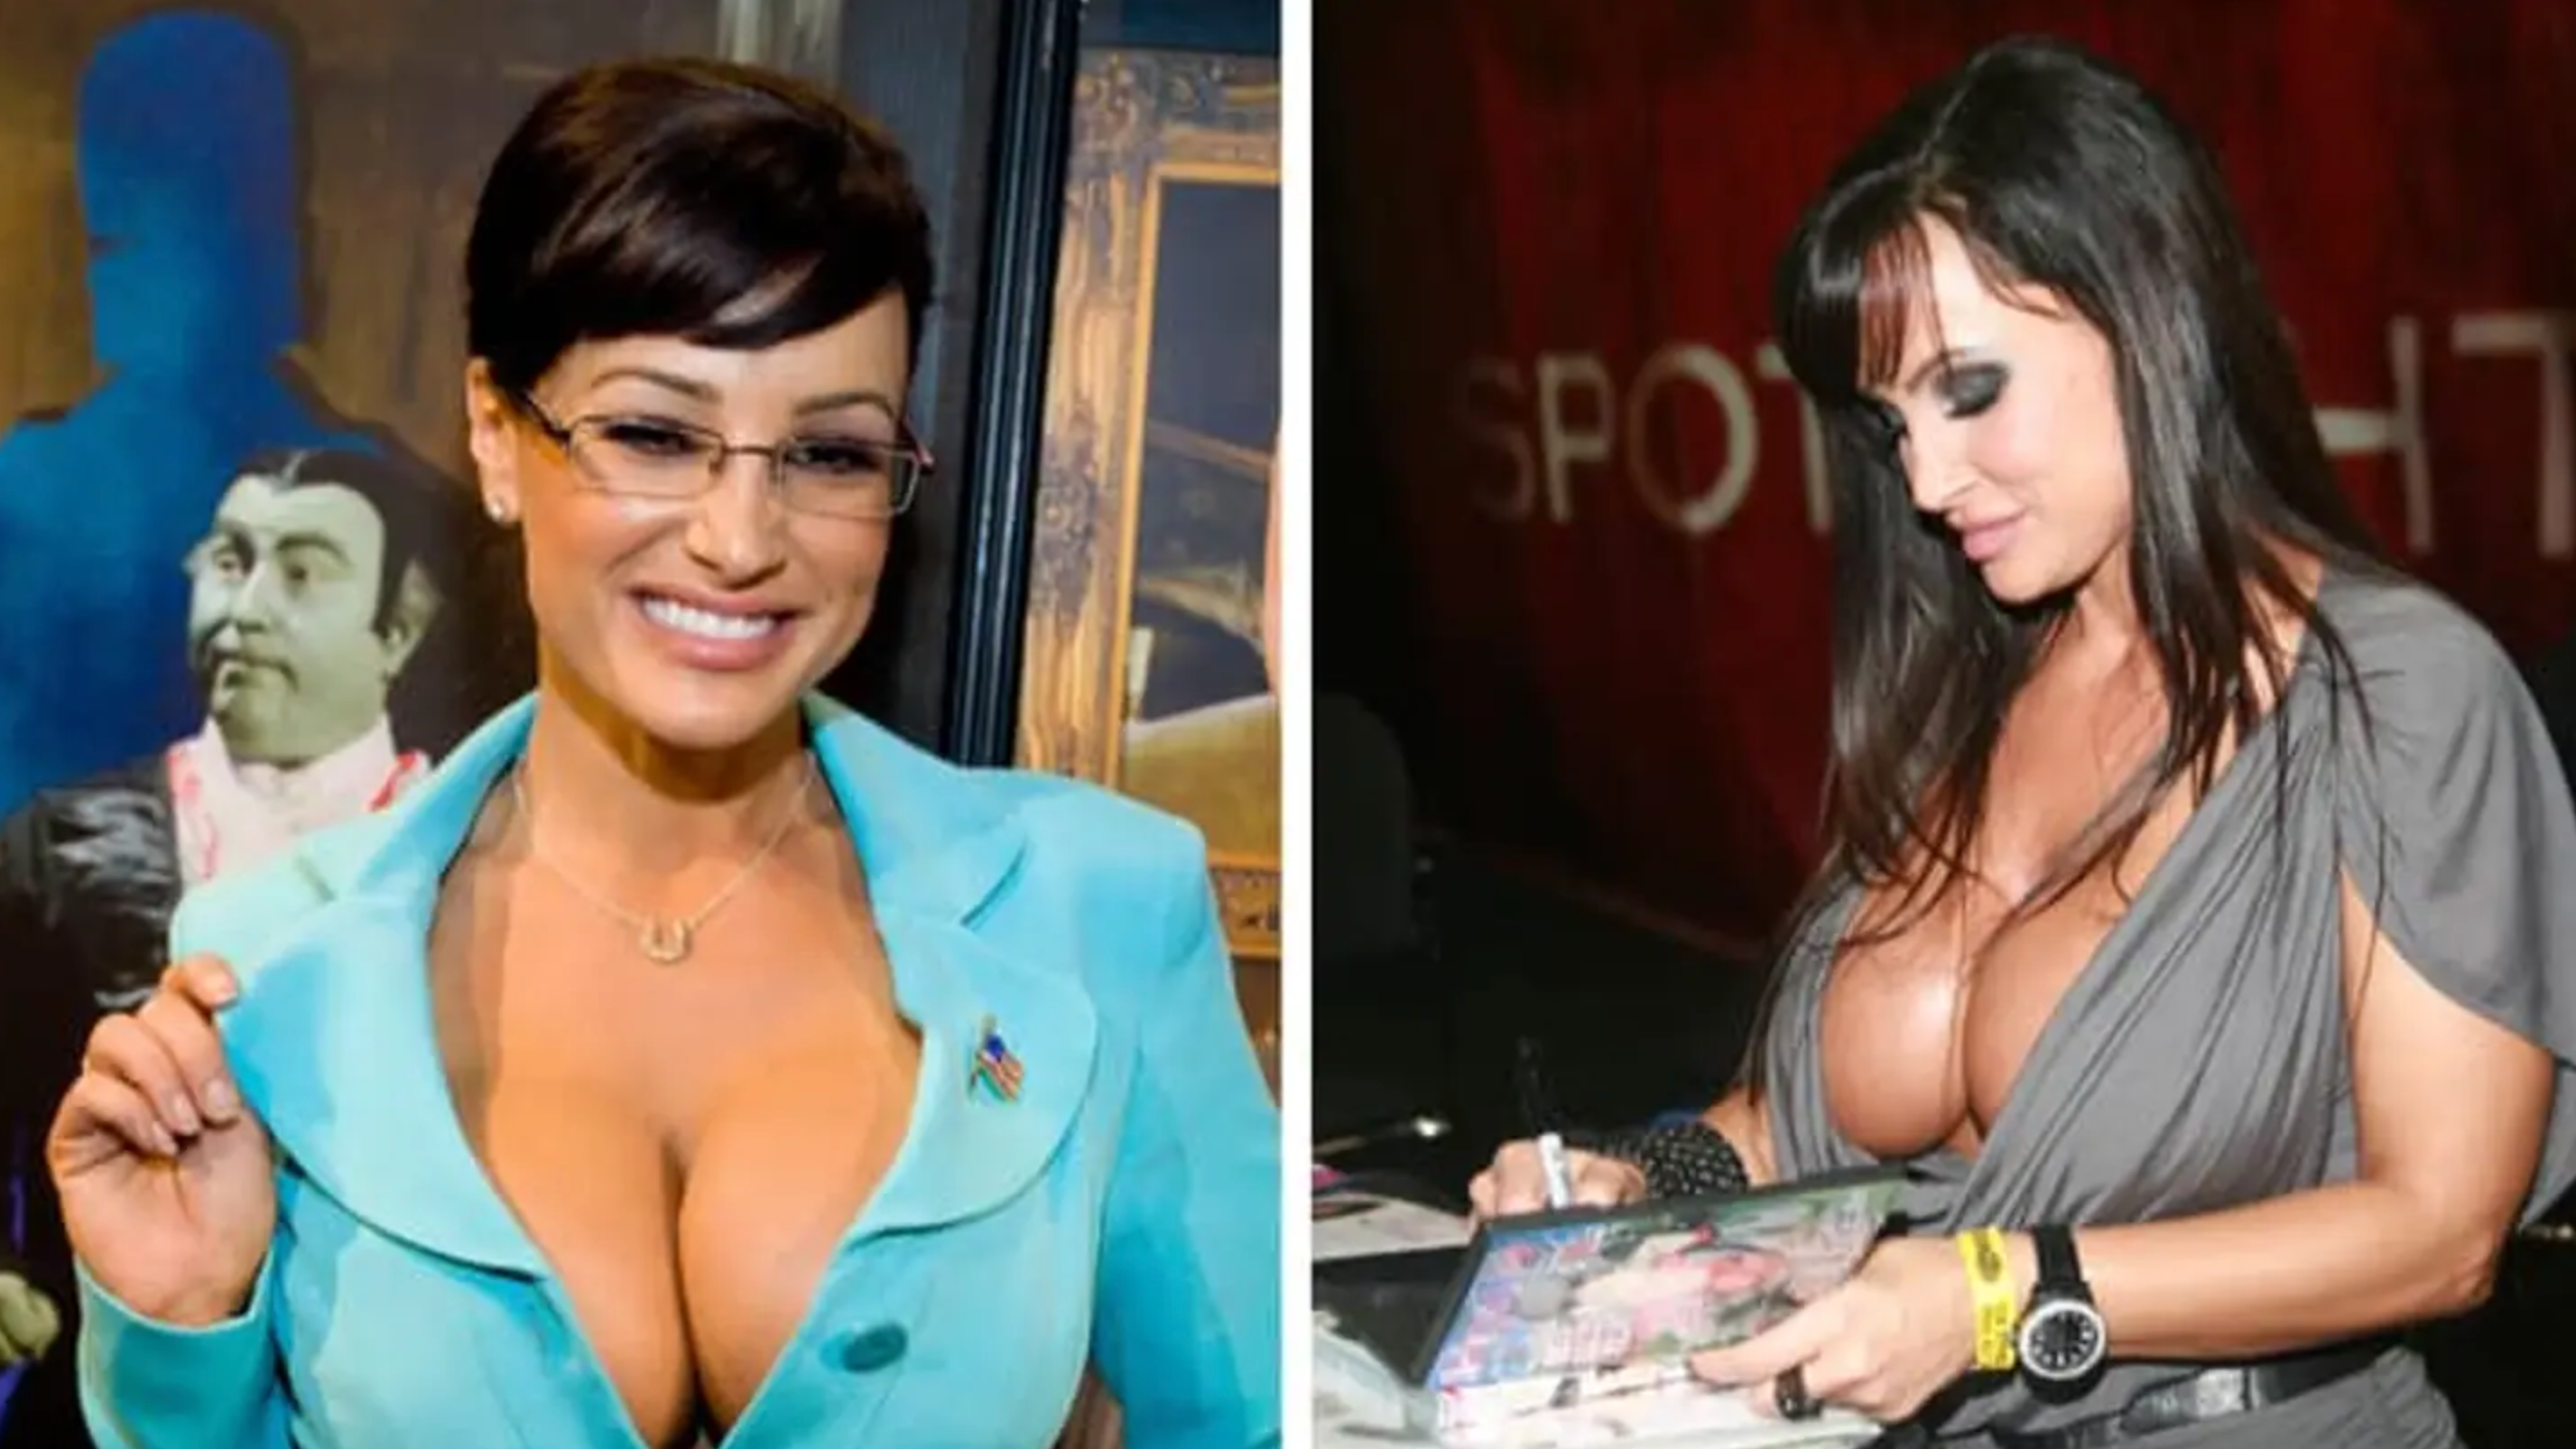 Lisa Ann reveals which athletes are the best in the bedroom photo